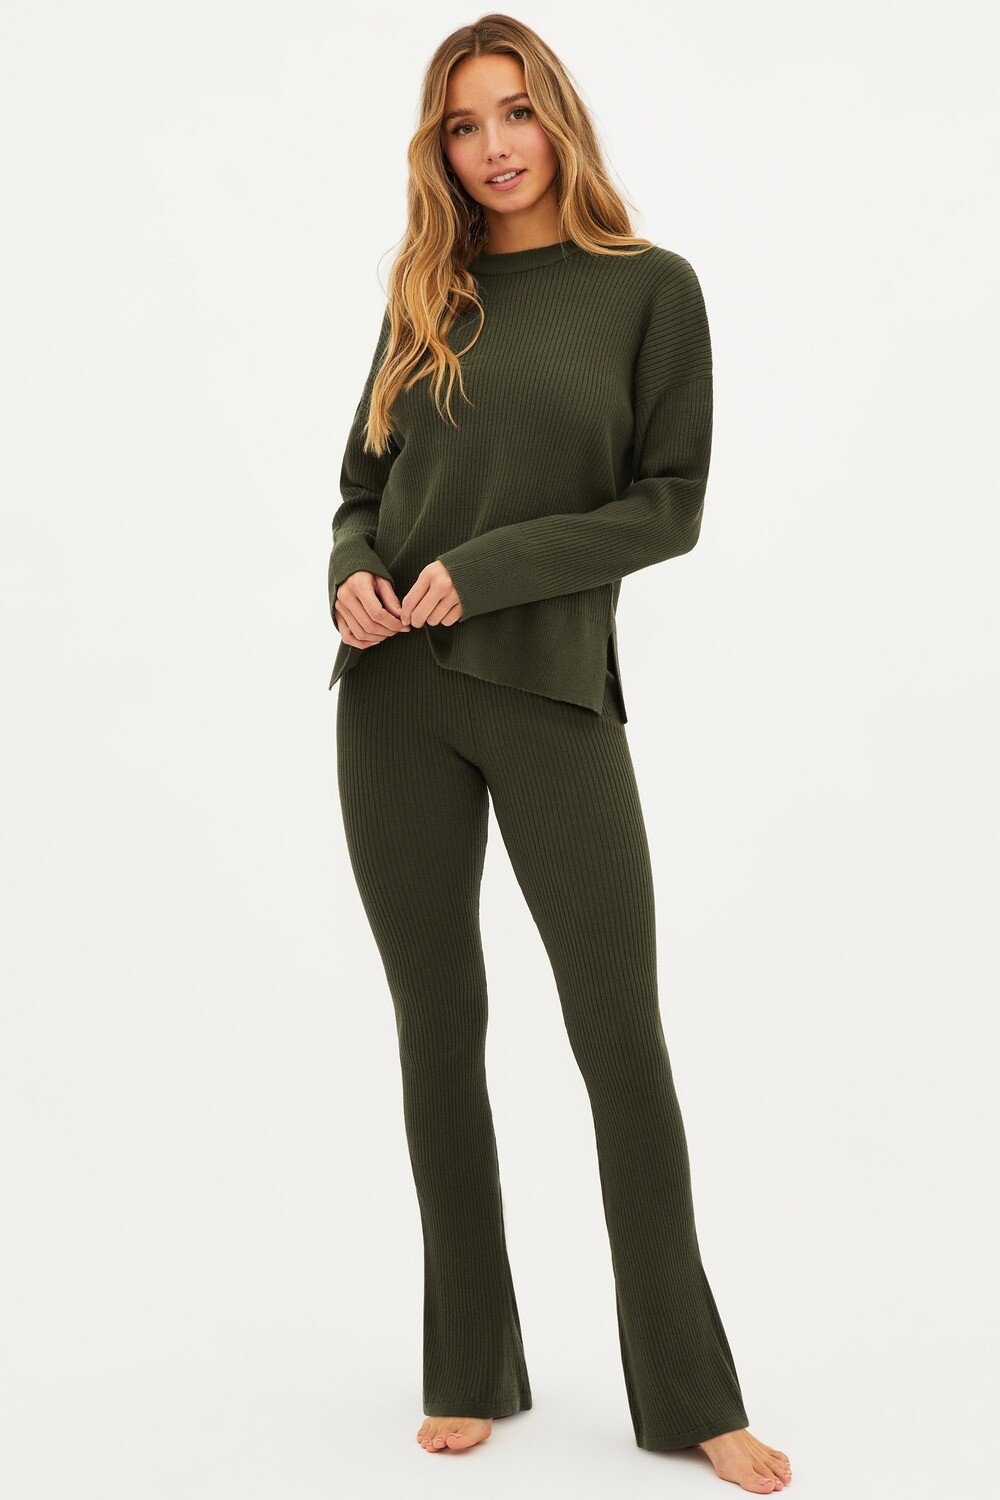 Tory Pant in Olive Sweater Rib